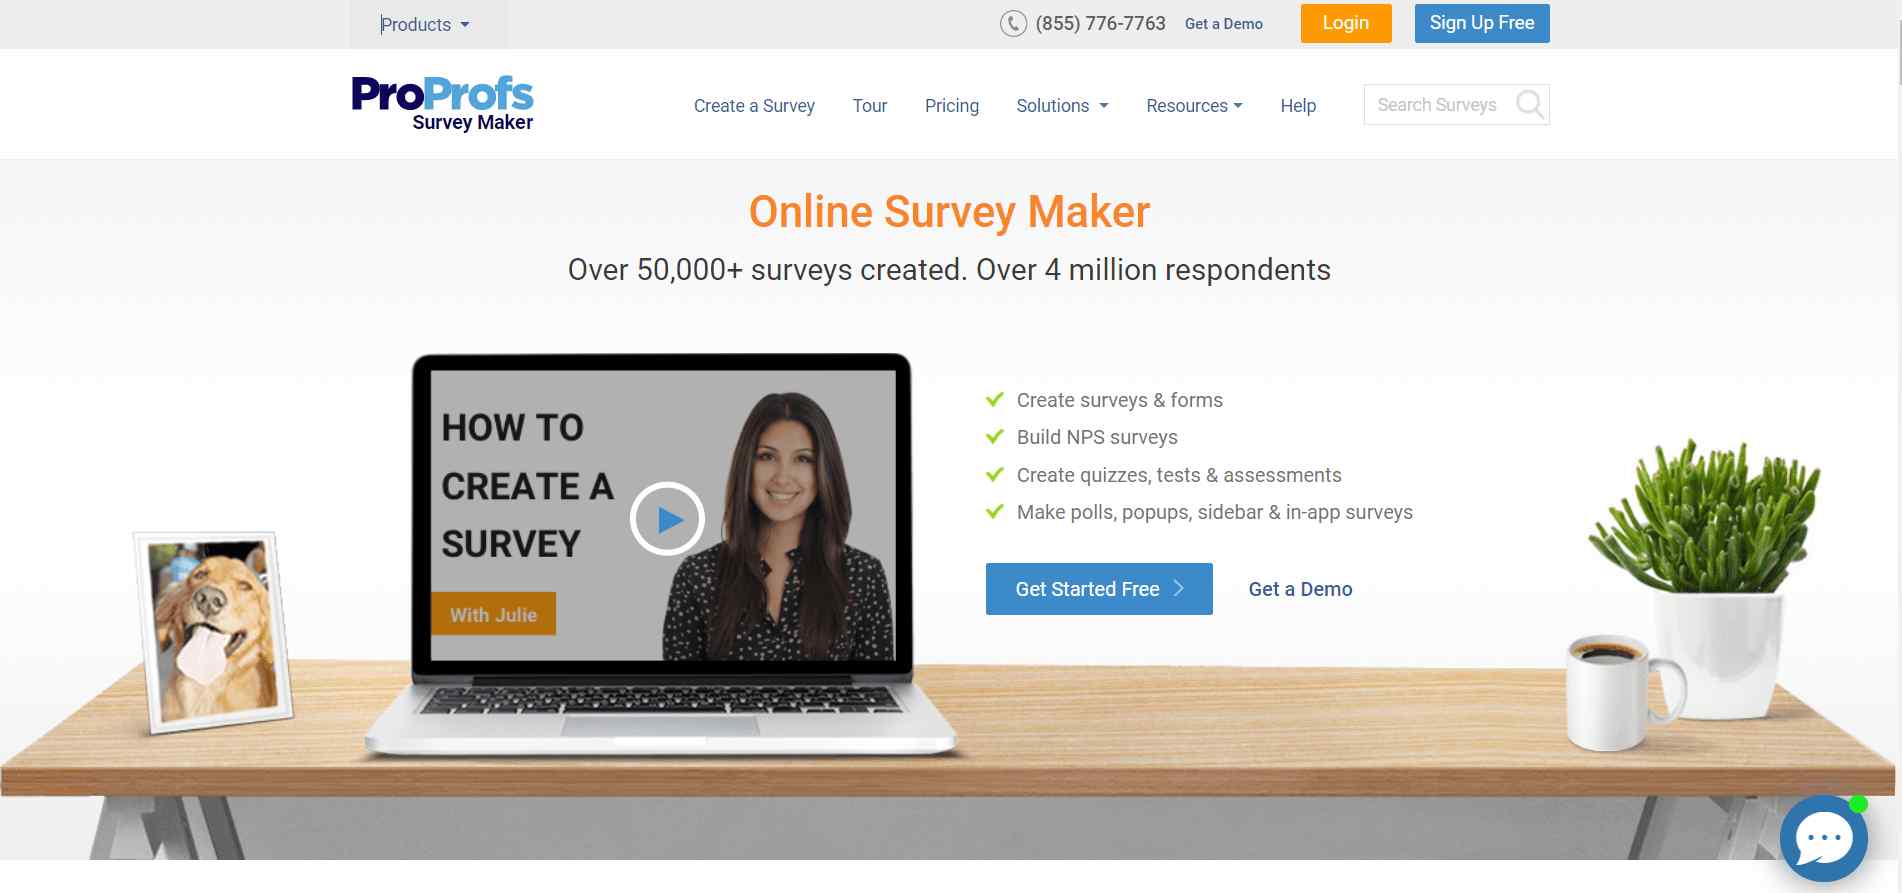 ProProfs Survey Maker is one of the best software for conduct user research